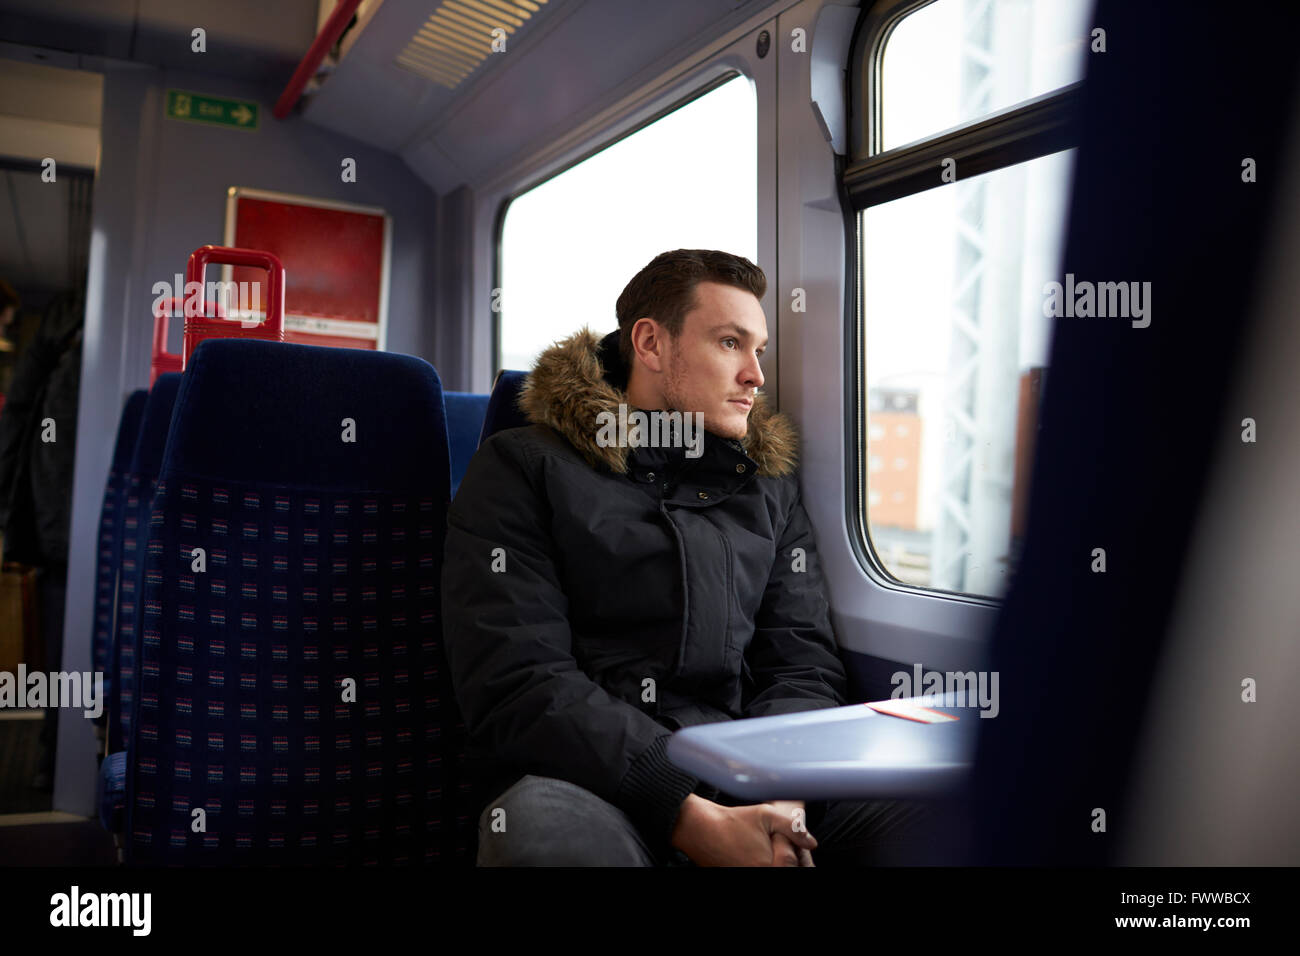 Young Man Sitting In Train Carriage On Railway Journey Stock Photo